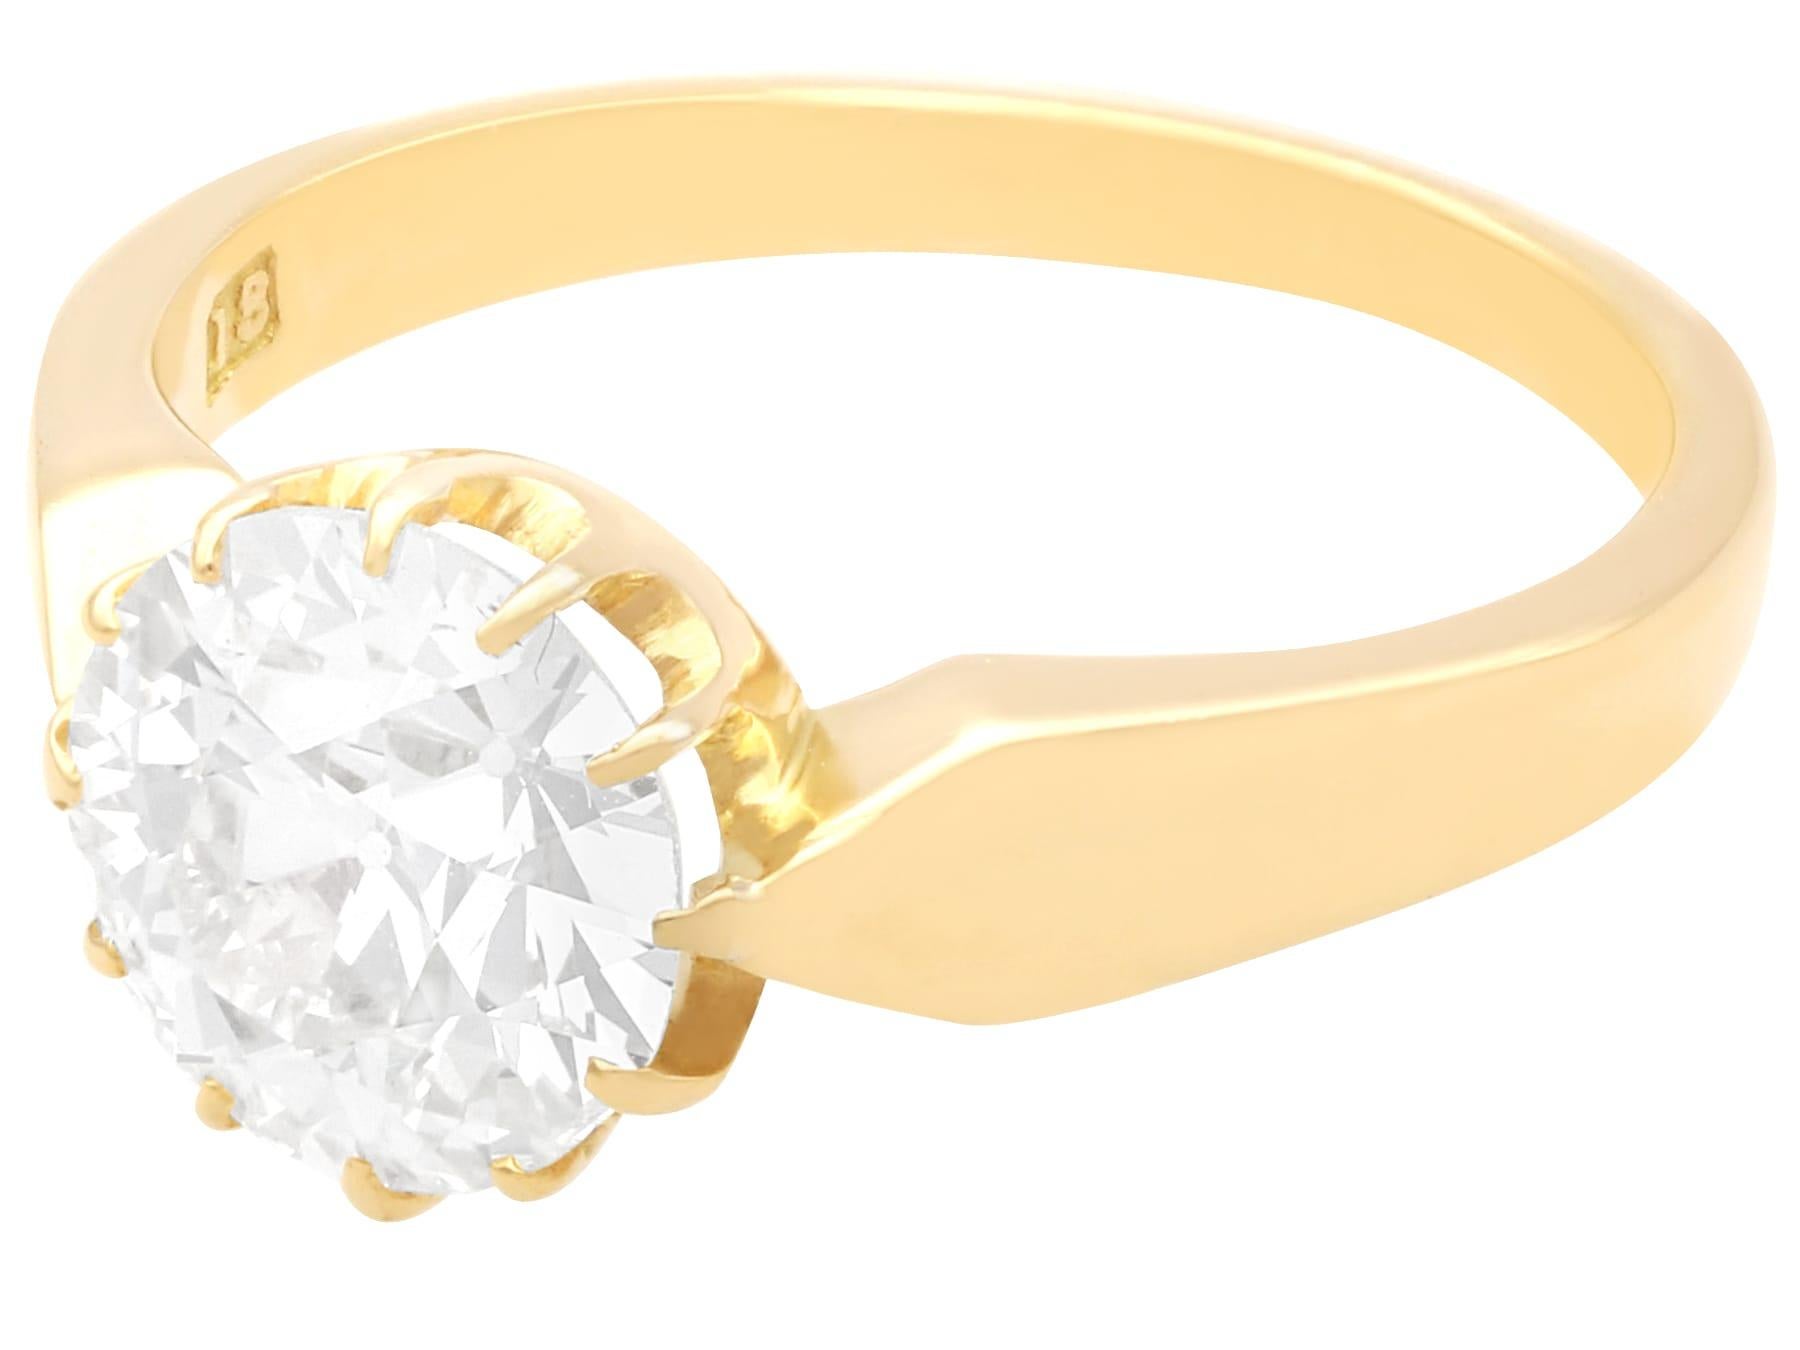 Round Cut Edwardian 2.16 carat Diamond and 18k Yellow Gold Solitaire Ring For Sale